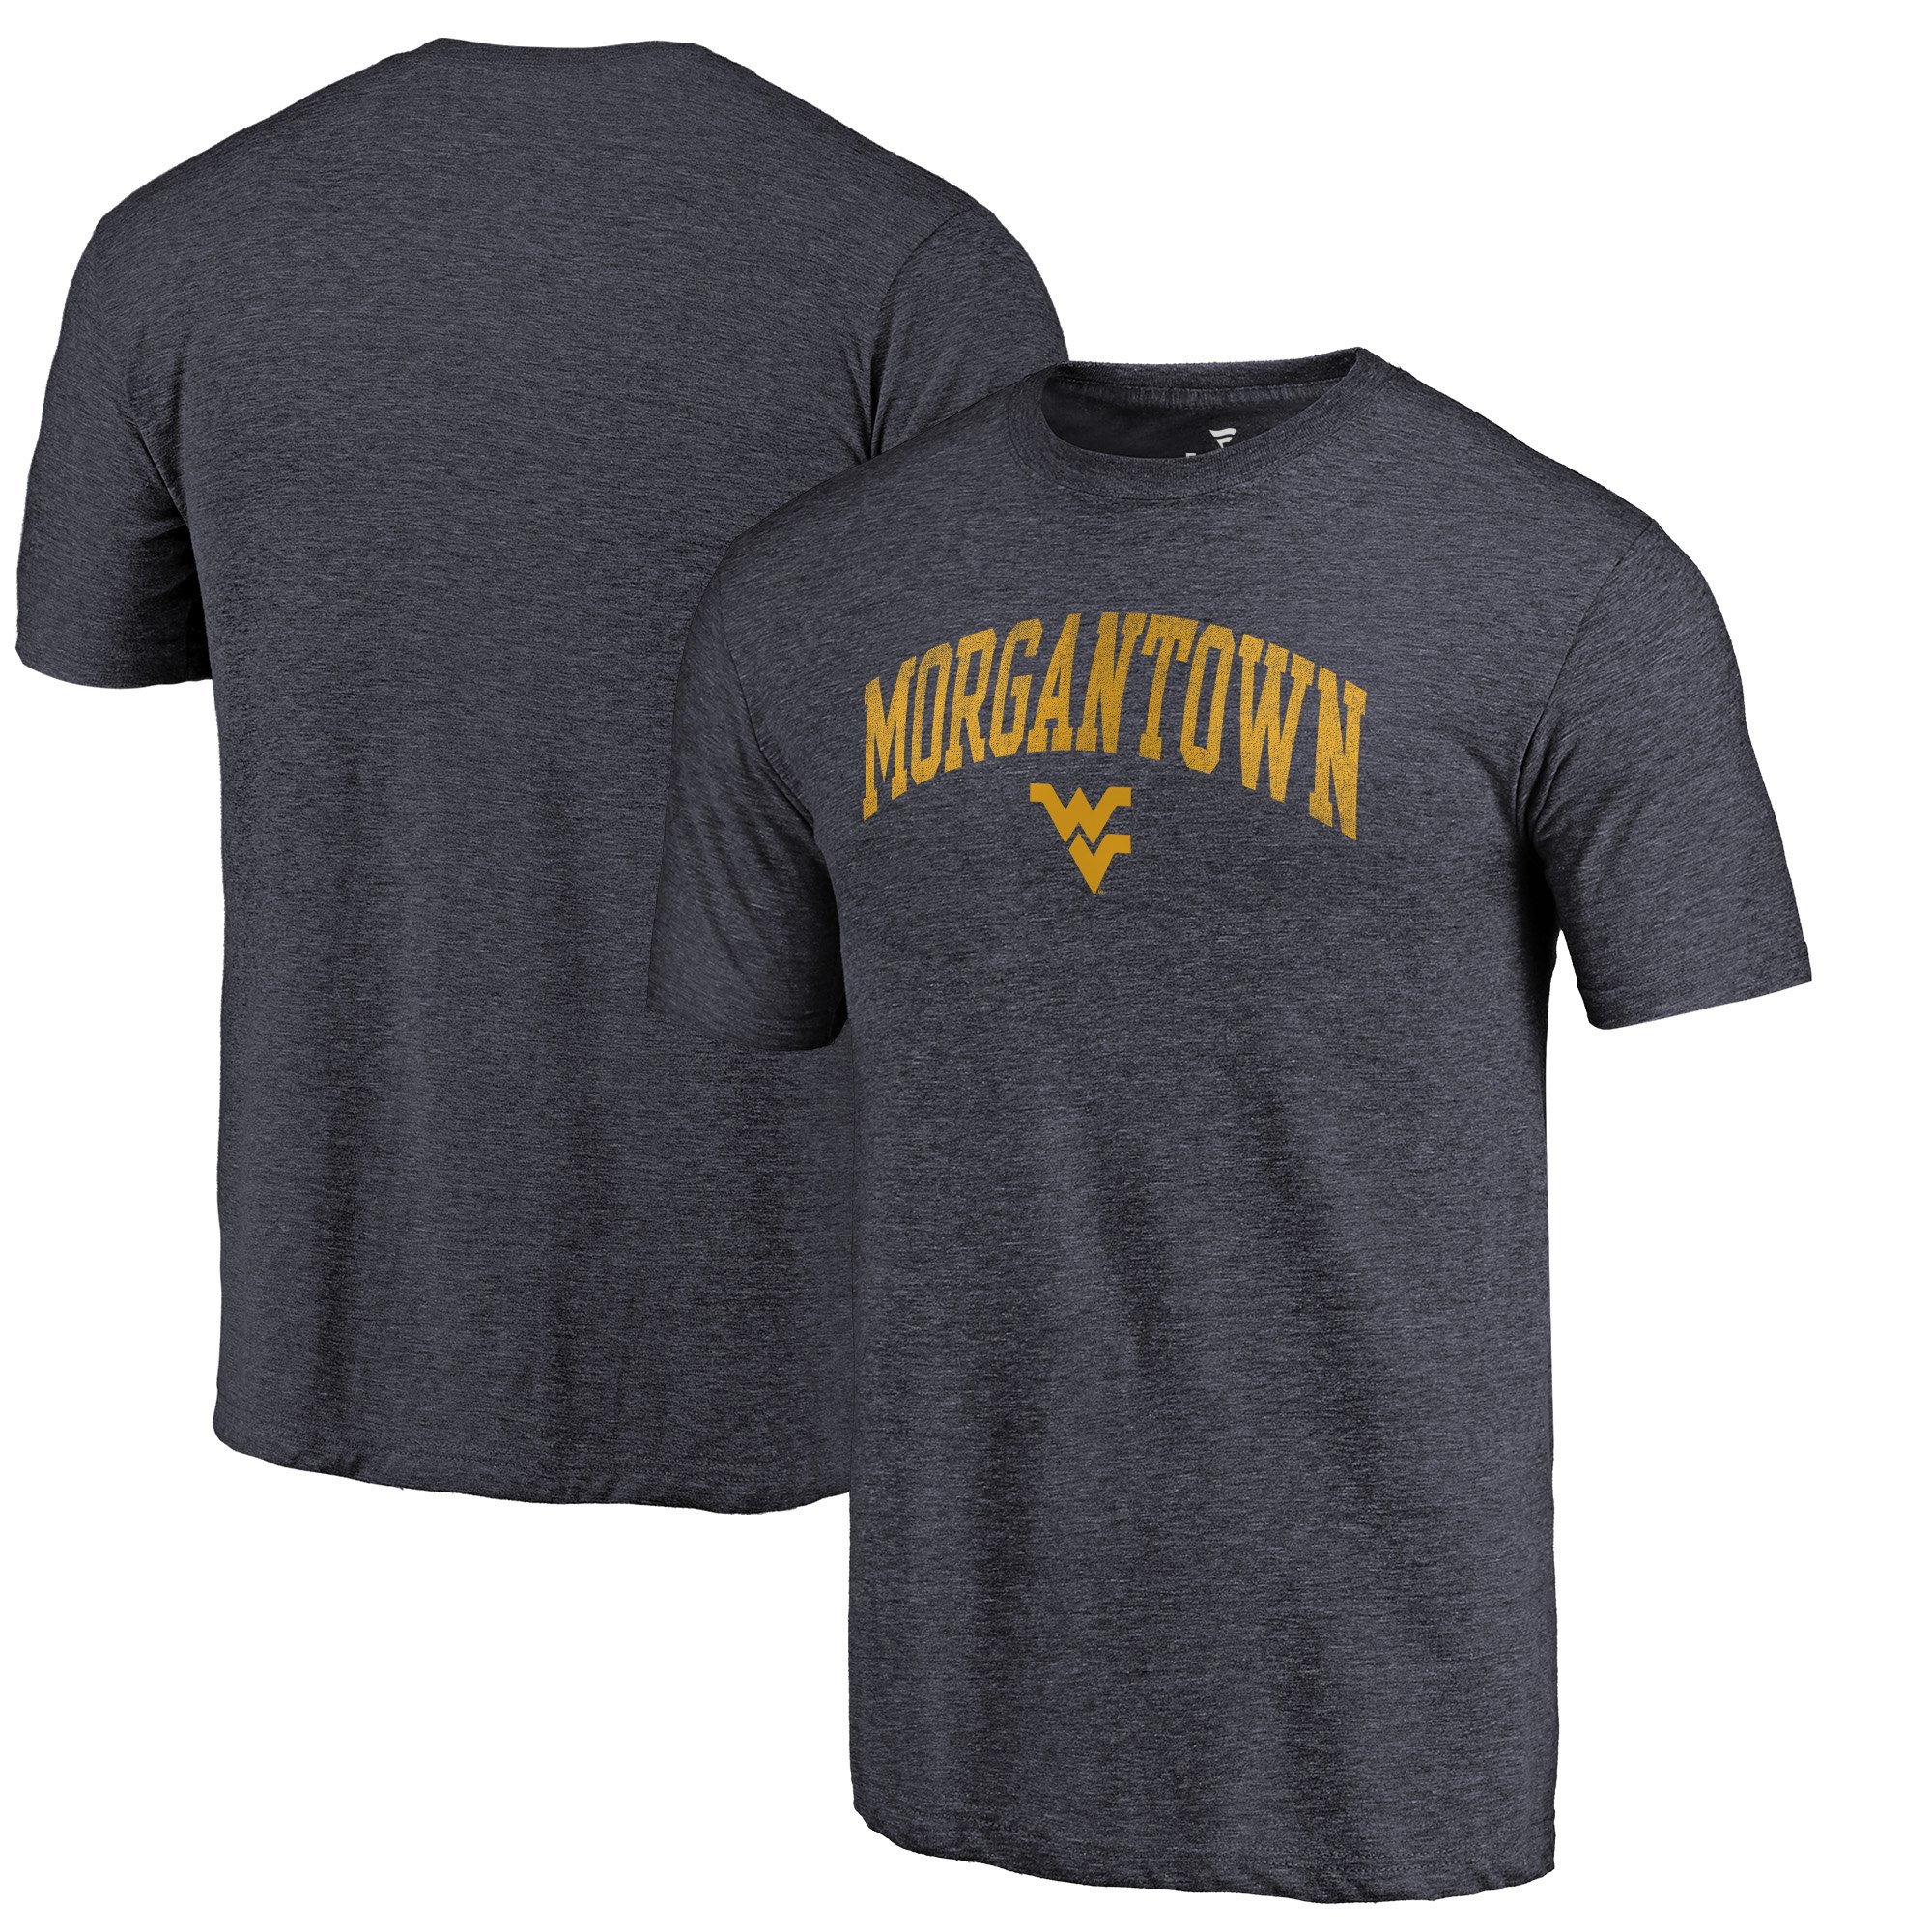 West Virginia Mountaineers Fanatics Branded Navy Hometown Arched City Tri-Blend T-Shirt